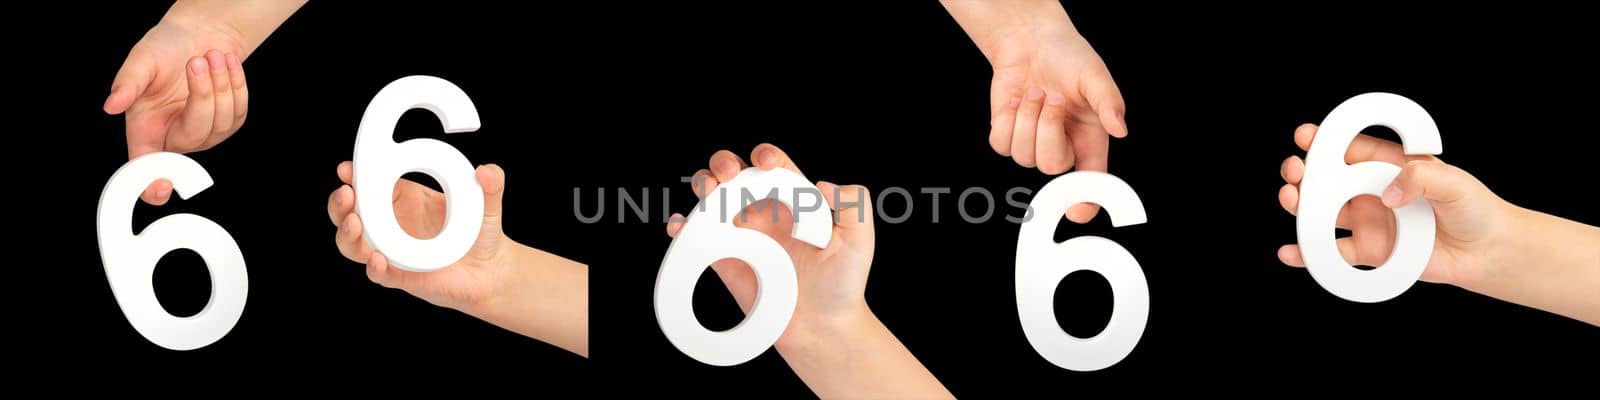 Number six in hand isolated on black background. Number 6 in a child's hand holding on a black background. A large set of hands with the number six, for inserting into a project or design